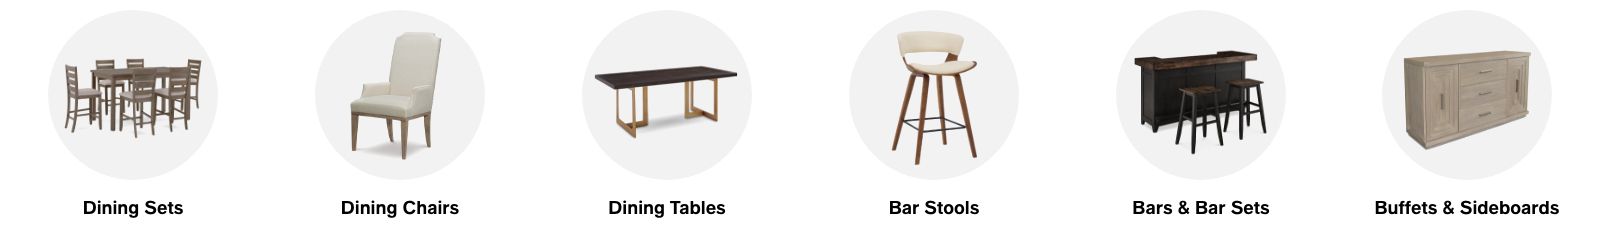 Dining Sets, Dining Chairs, Dining Tables, Bar Stools, Bars & Bar Sets, Buffets & Sideboards